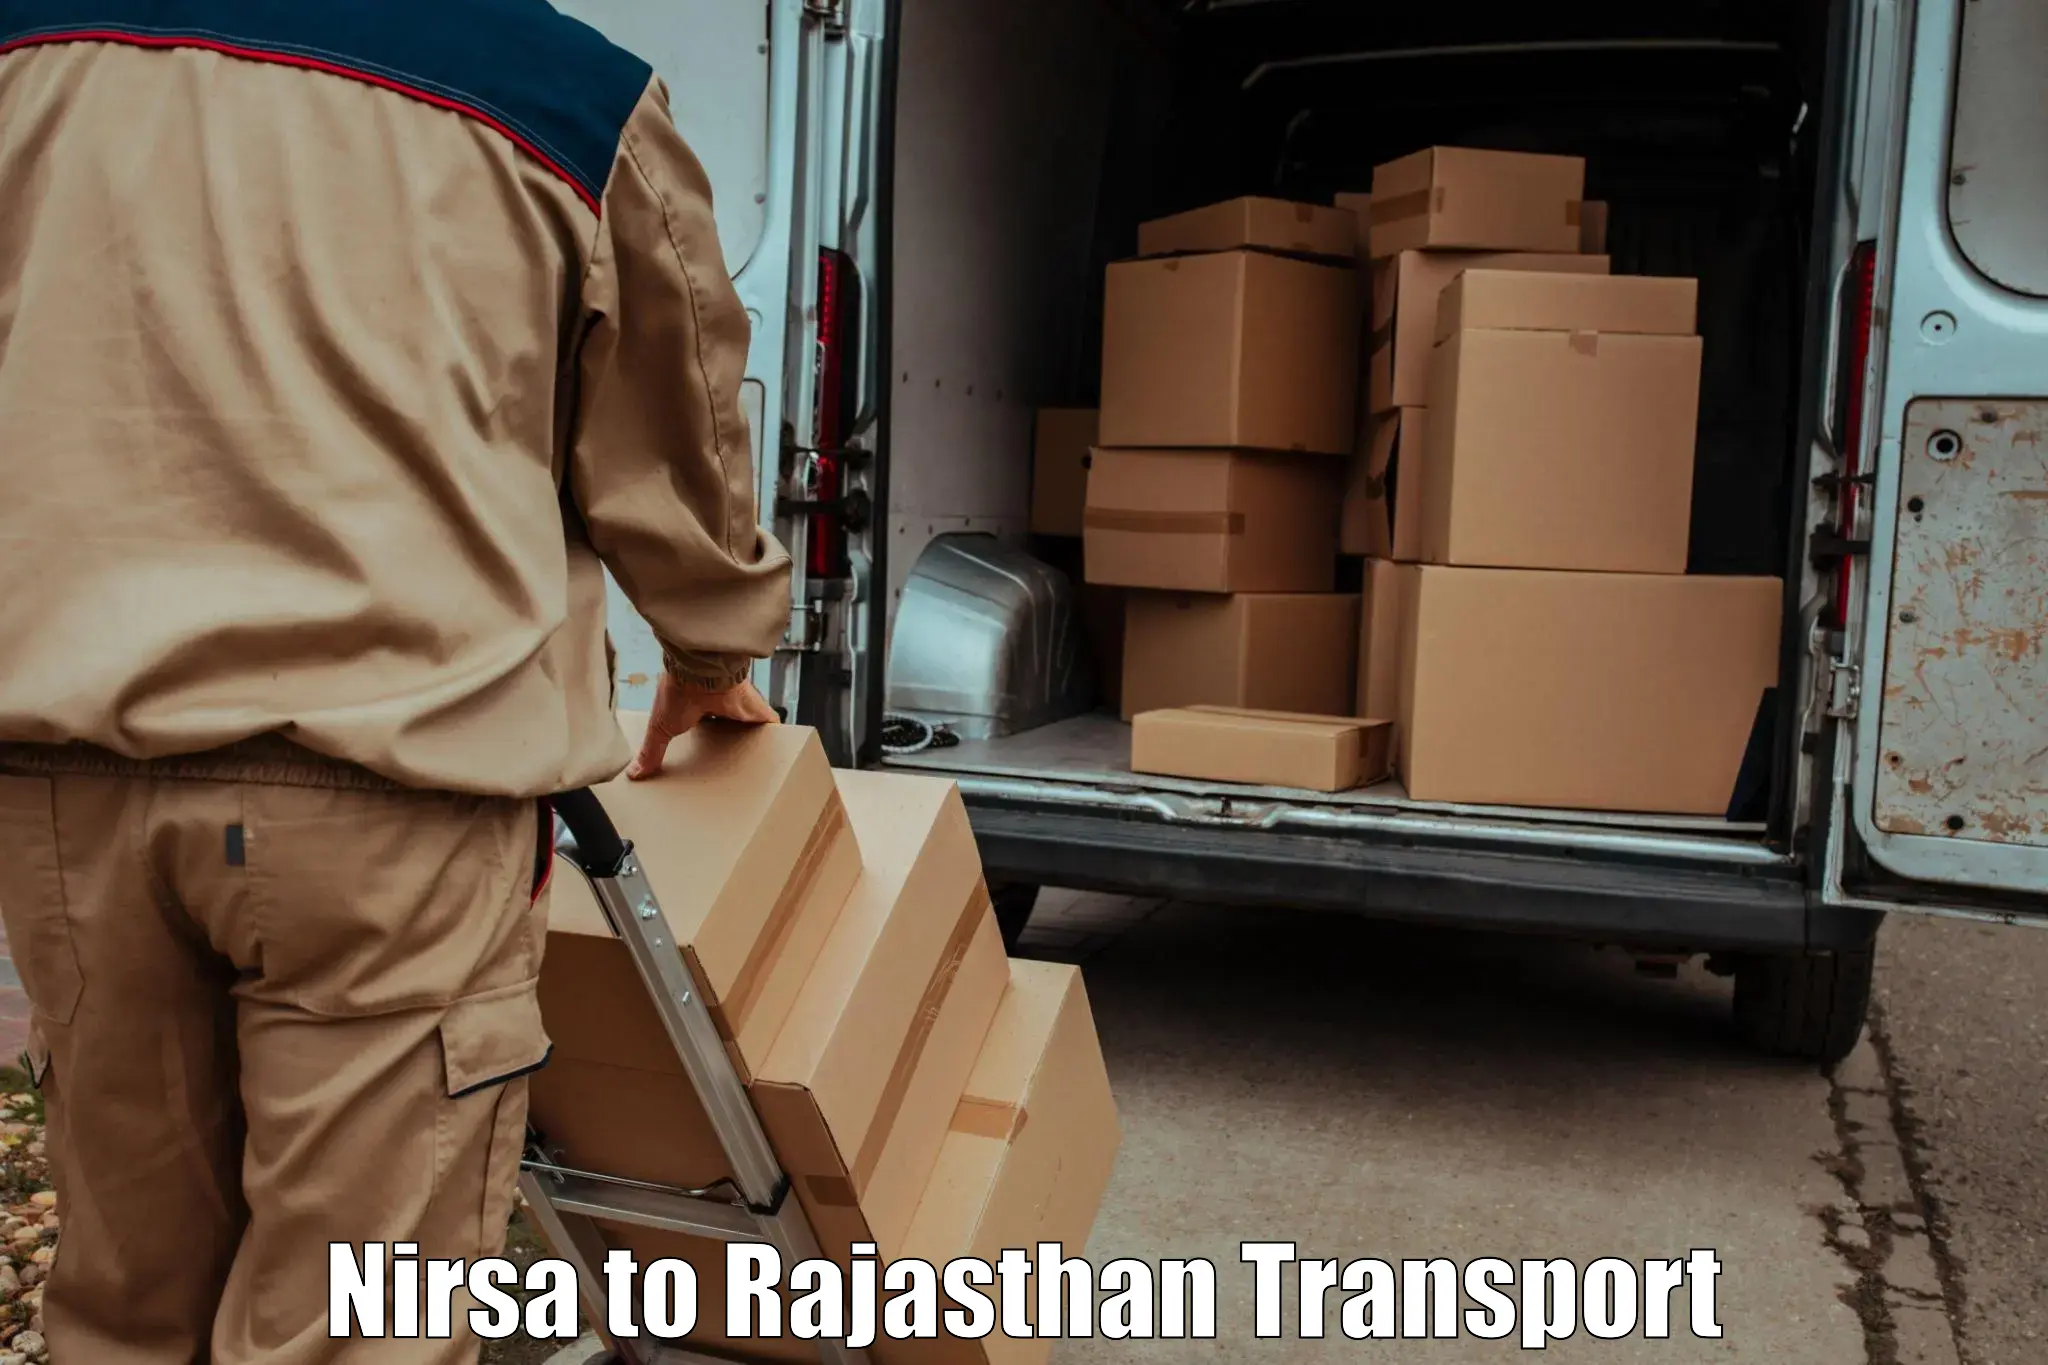 Nearby transport service Nirsa to Rajasthan